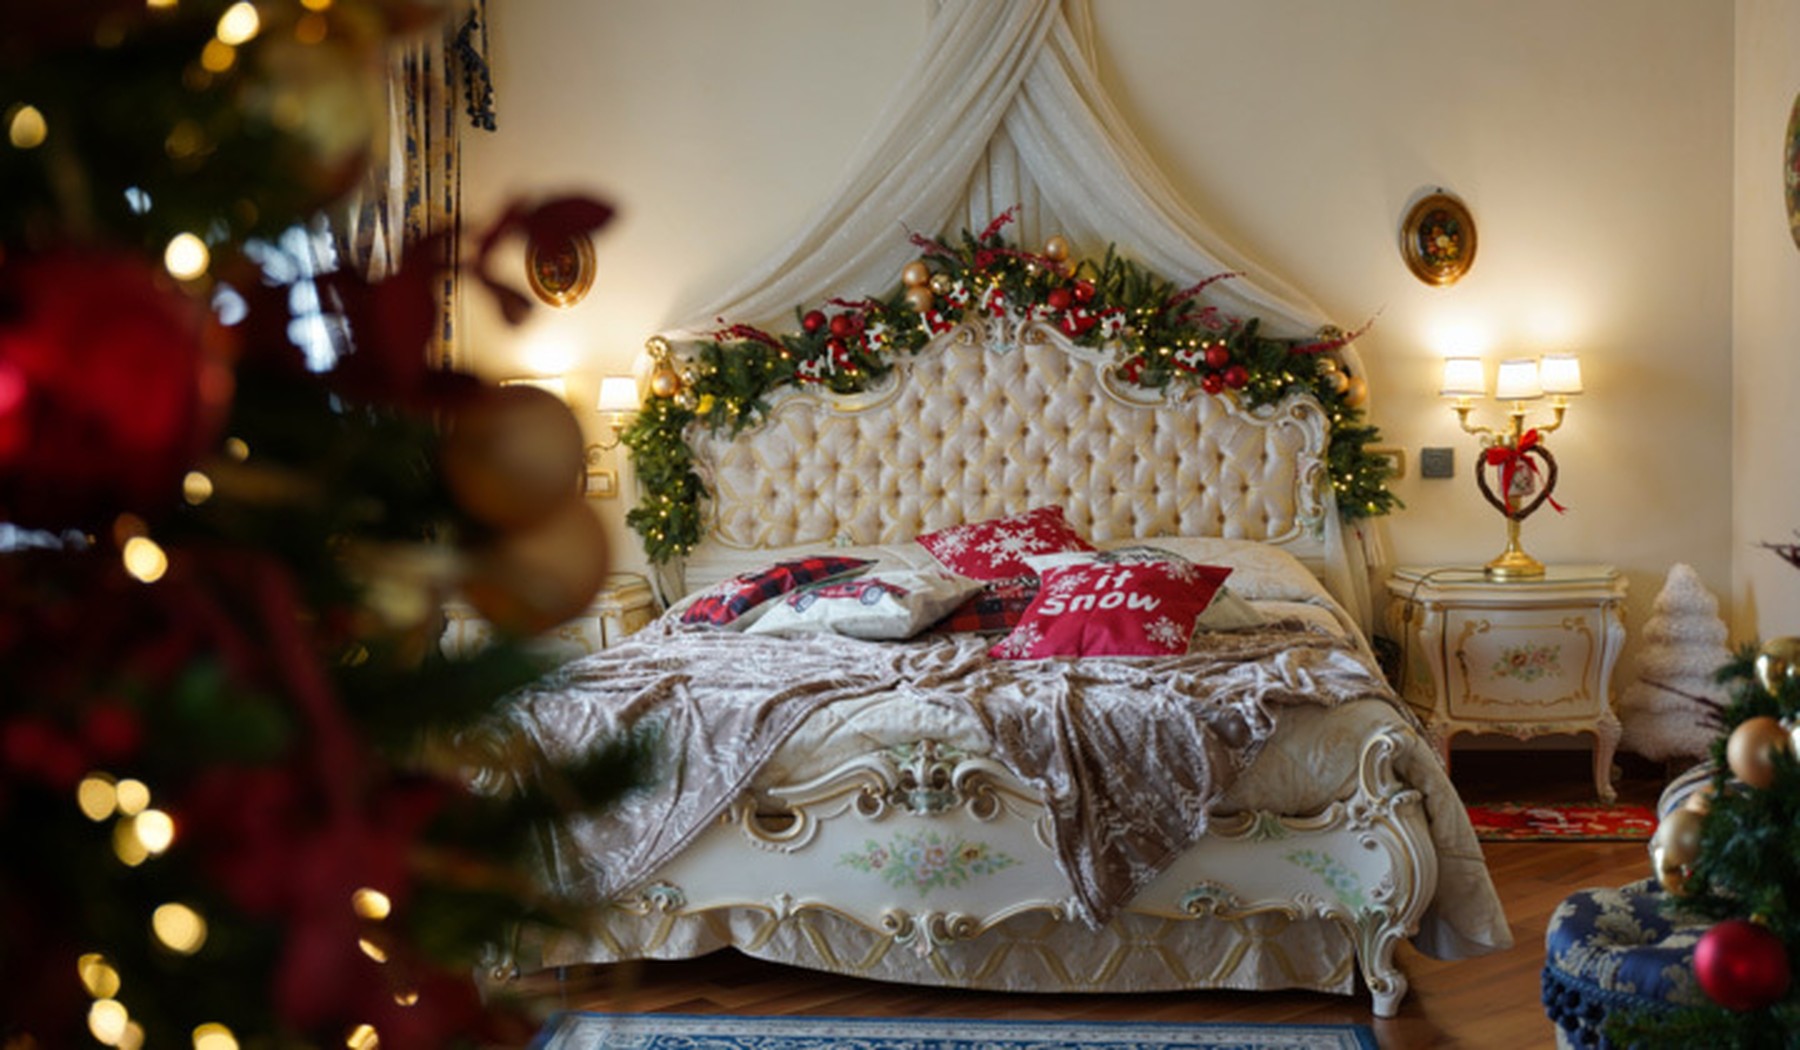 Bedroom decorated for Christmas